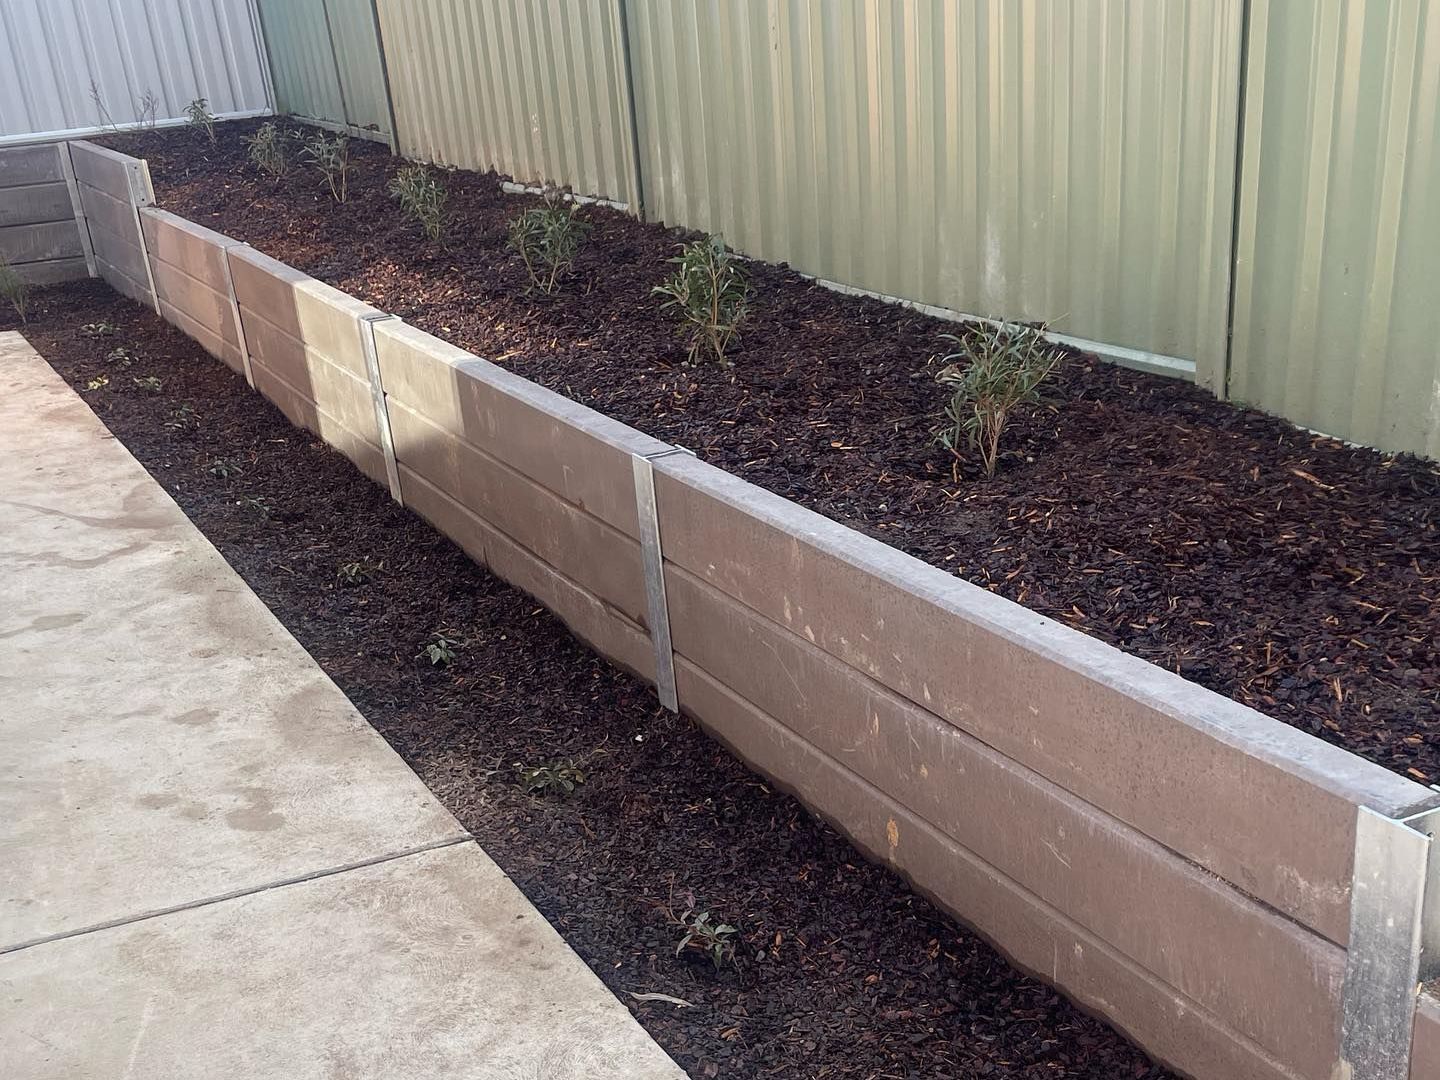 A concrete planter filled with dirt and plants next to a fence.